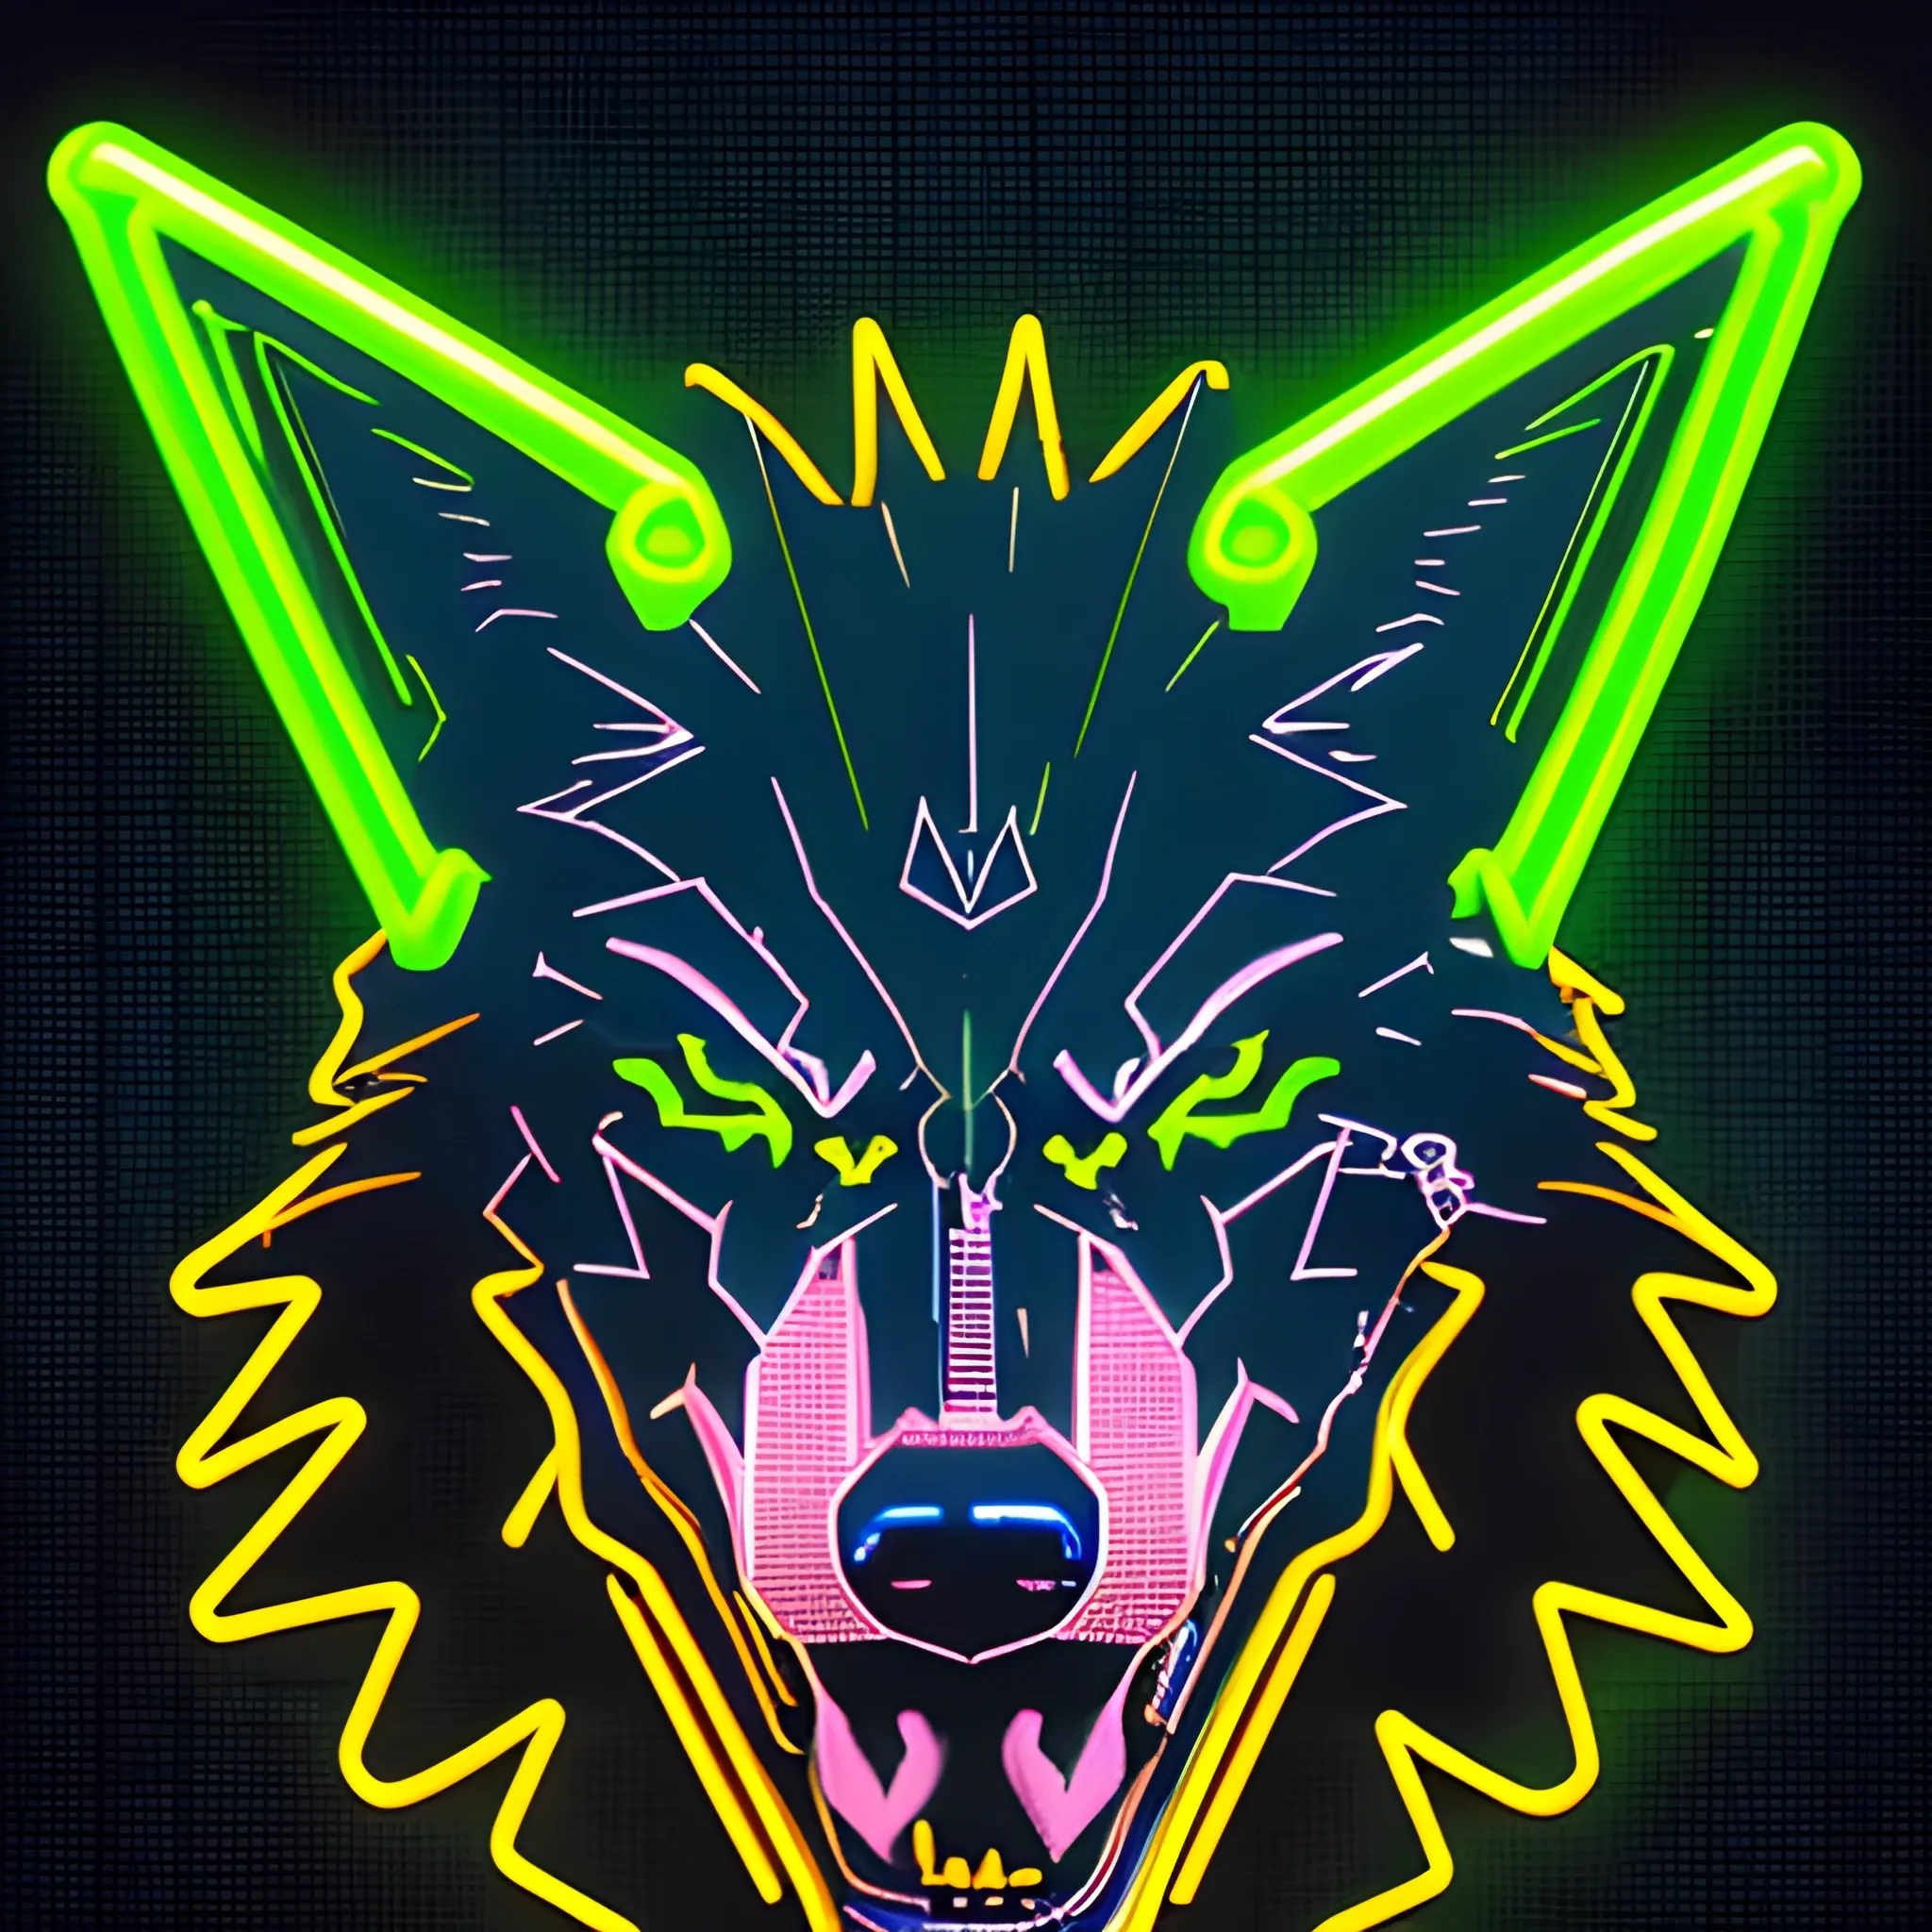 An angry cyberpunk wolf logo, using the yellow neon color, with an "A"at the background